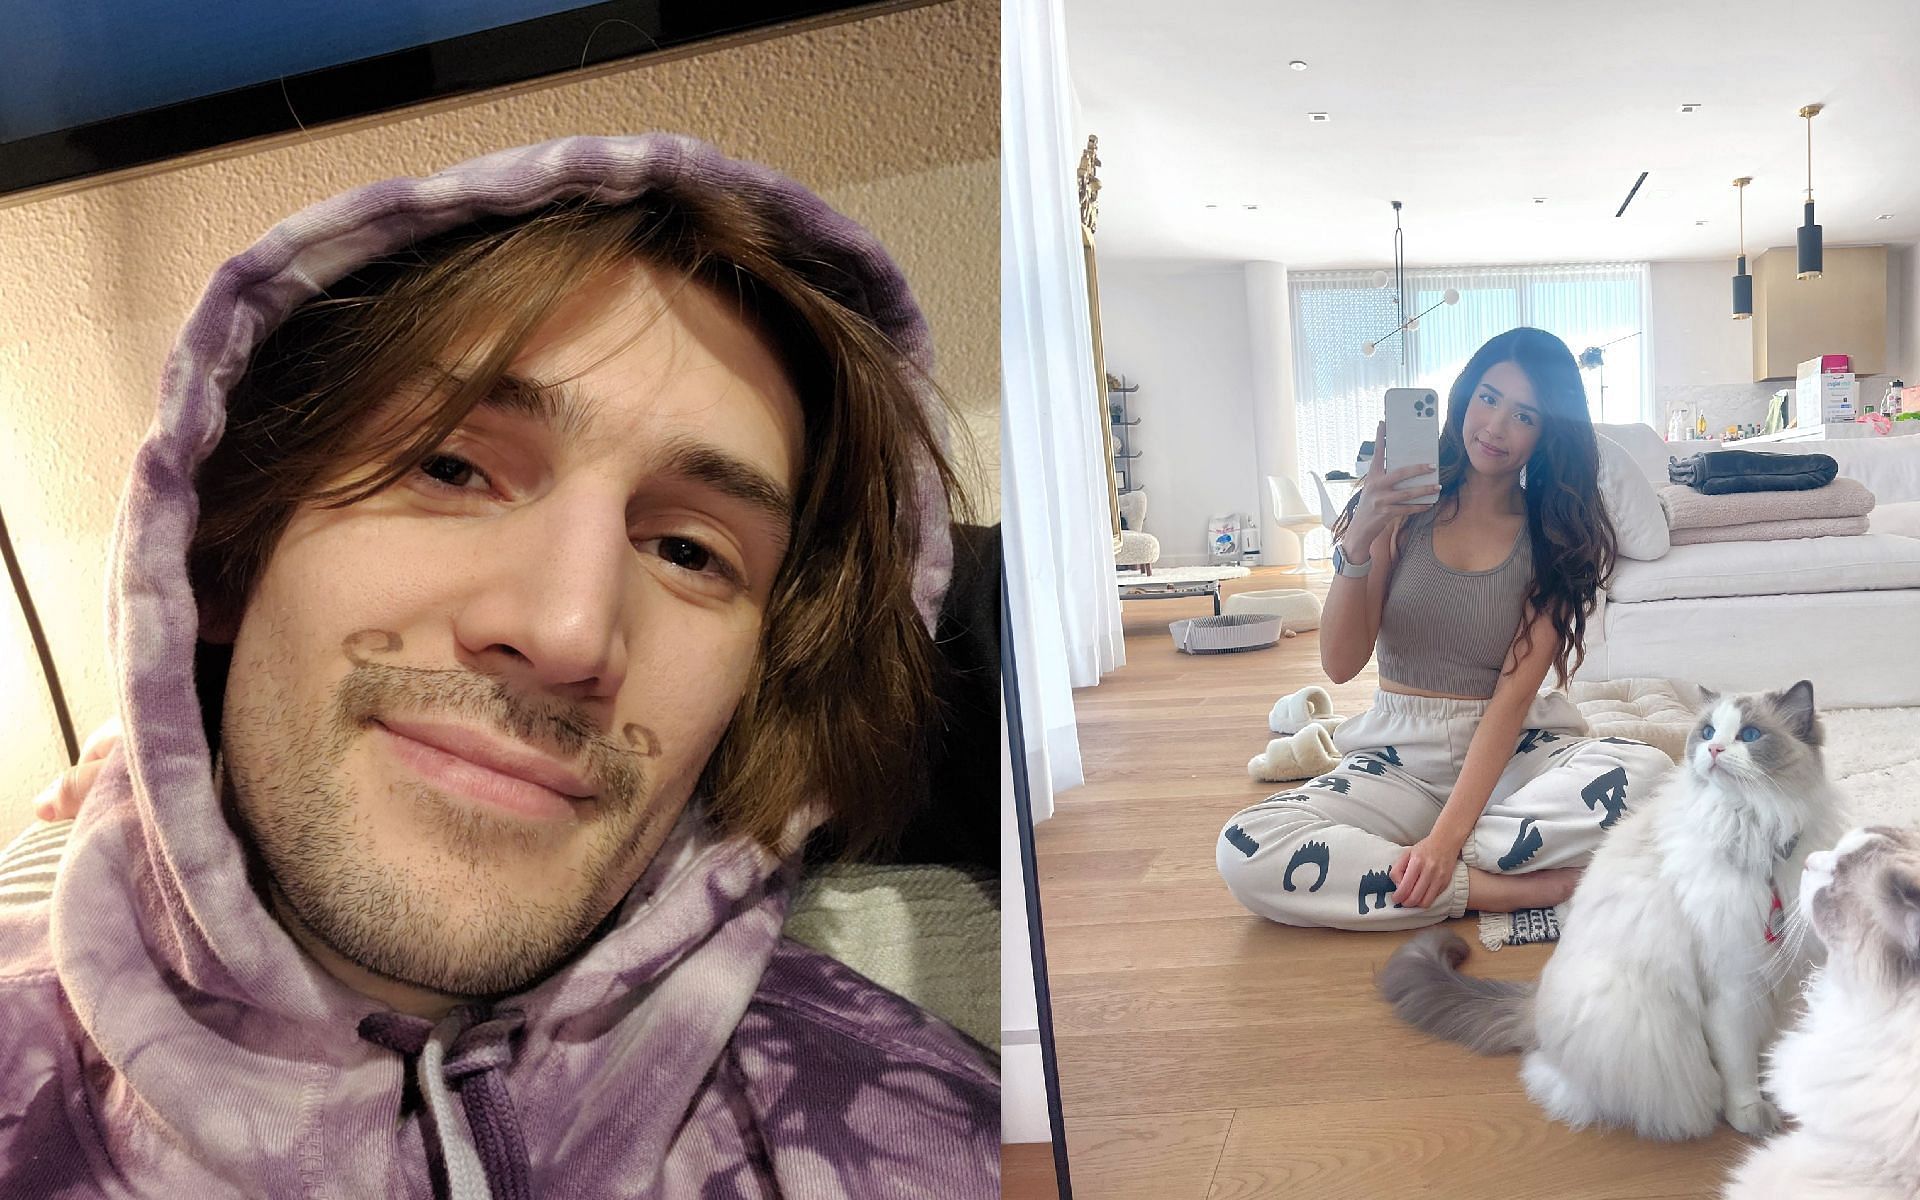 xQc talks about dating Pokimane&#039;s in-game character in GTA 5 RP (Images via xQcOW and Pokimane/Twitter)